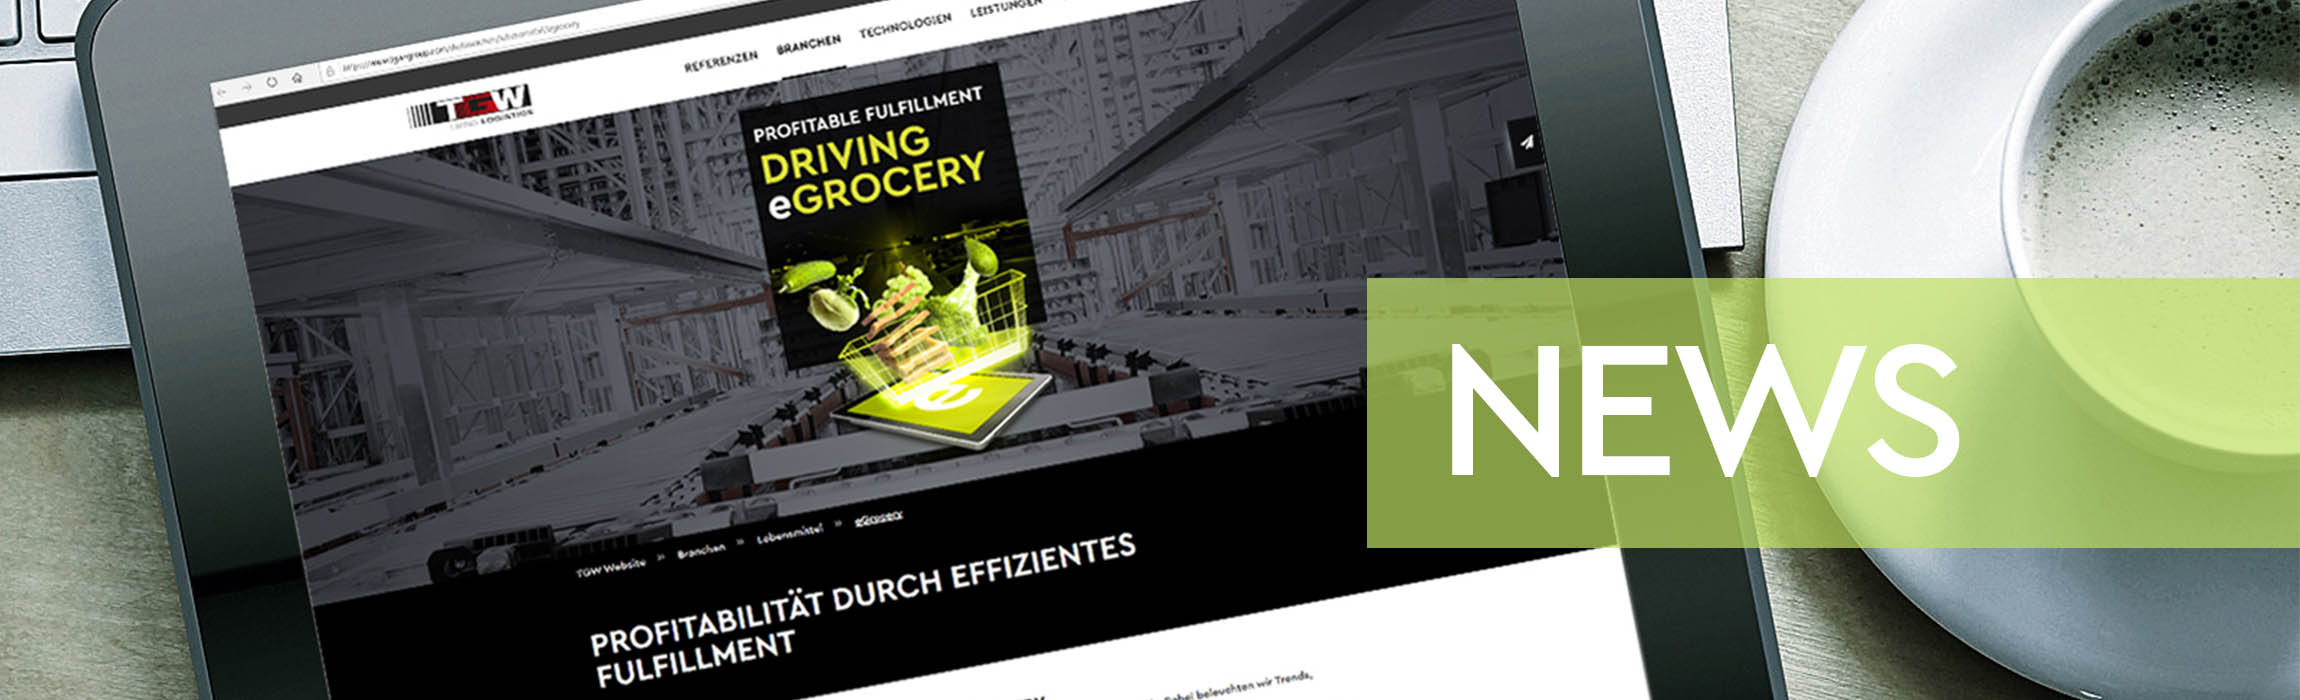 Latest eGrocery news and trends from the world of online grocery.